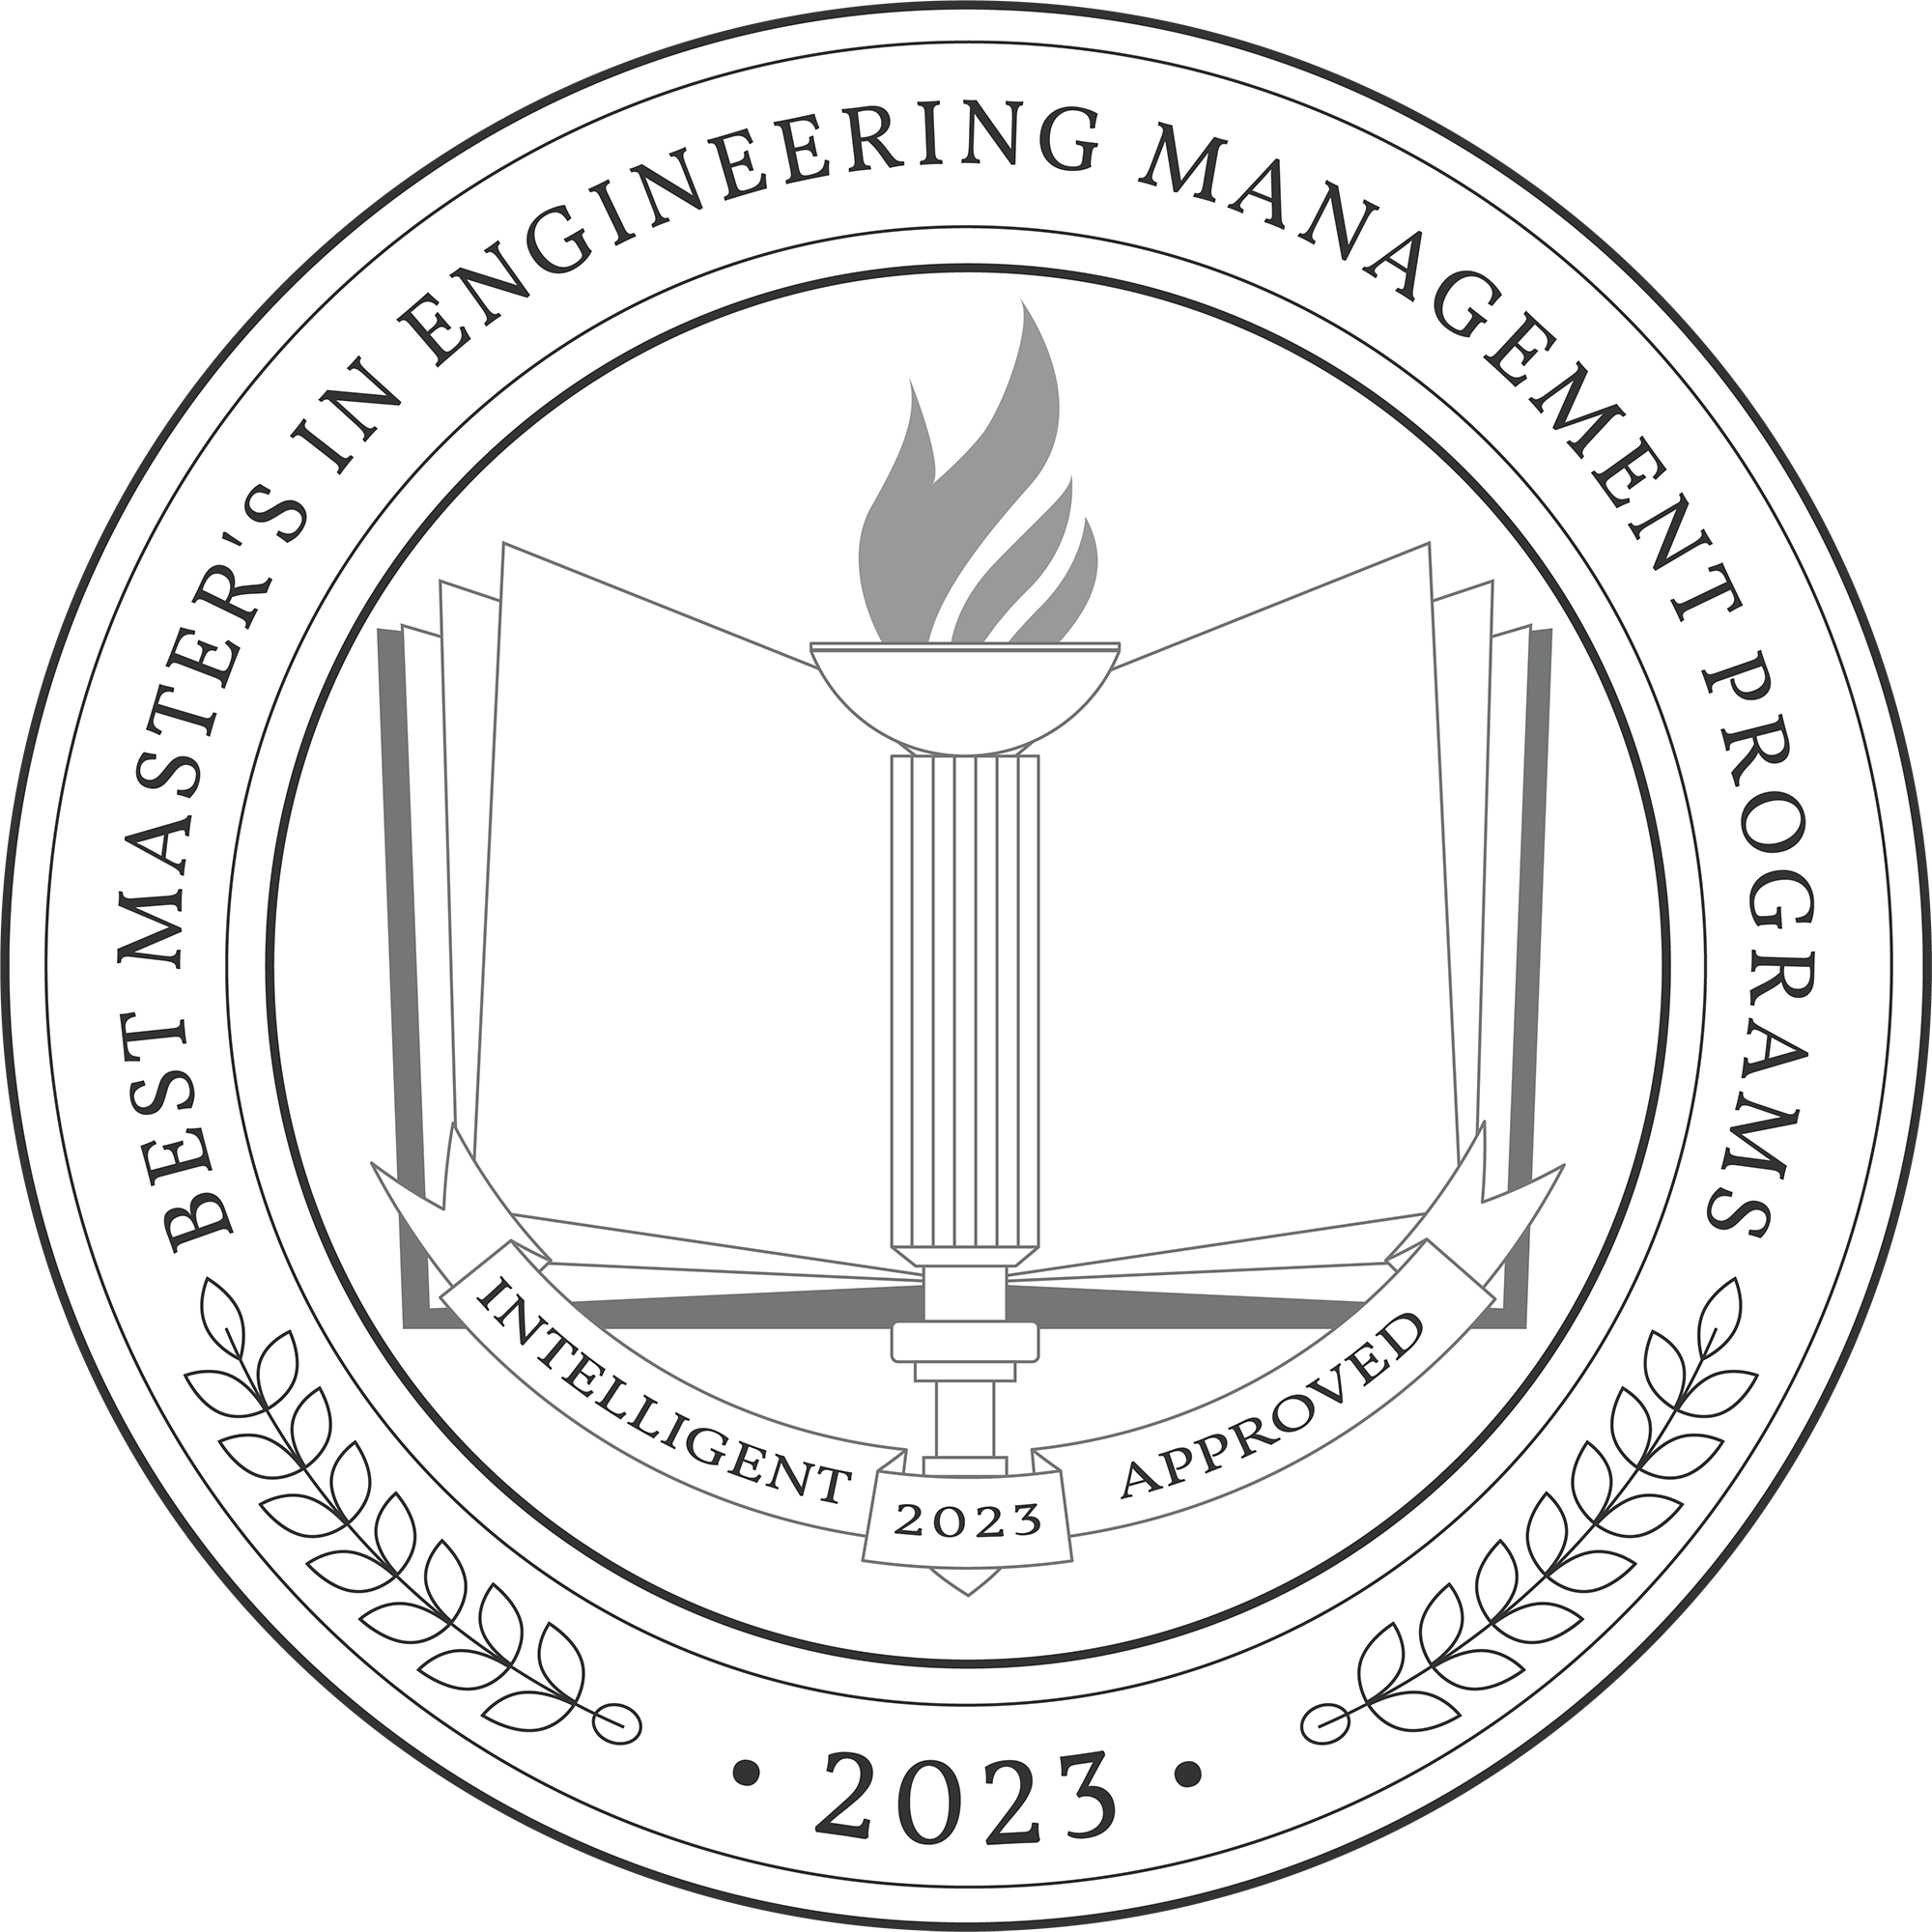 Engineering and Technology Management program among the best online master’s programs in US